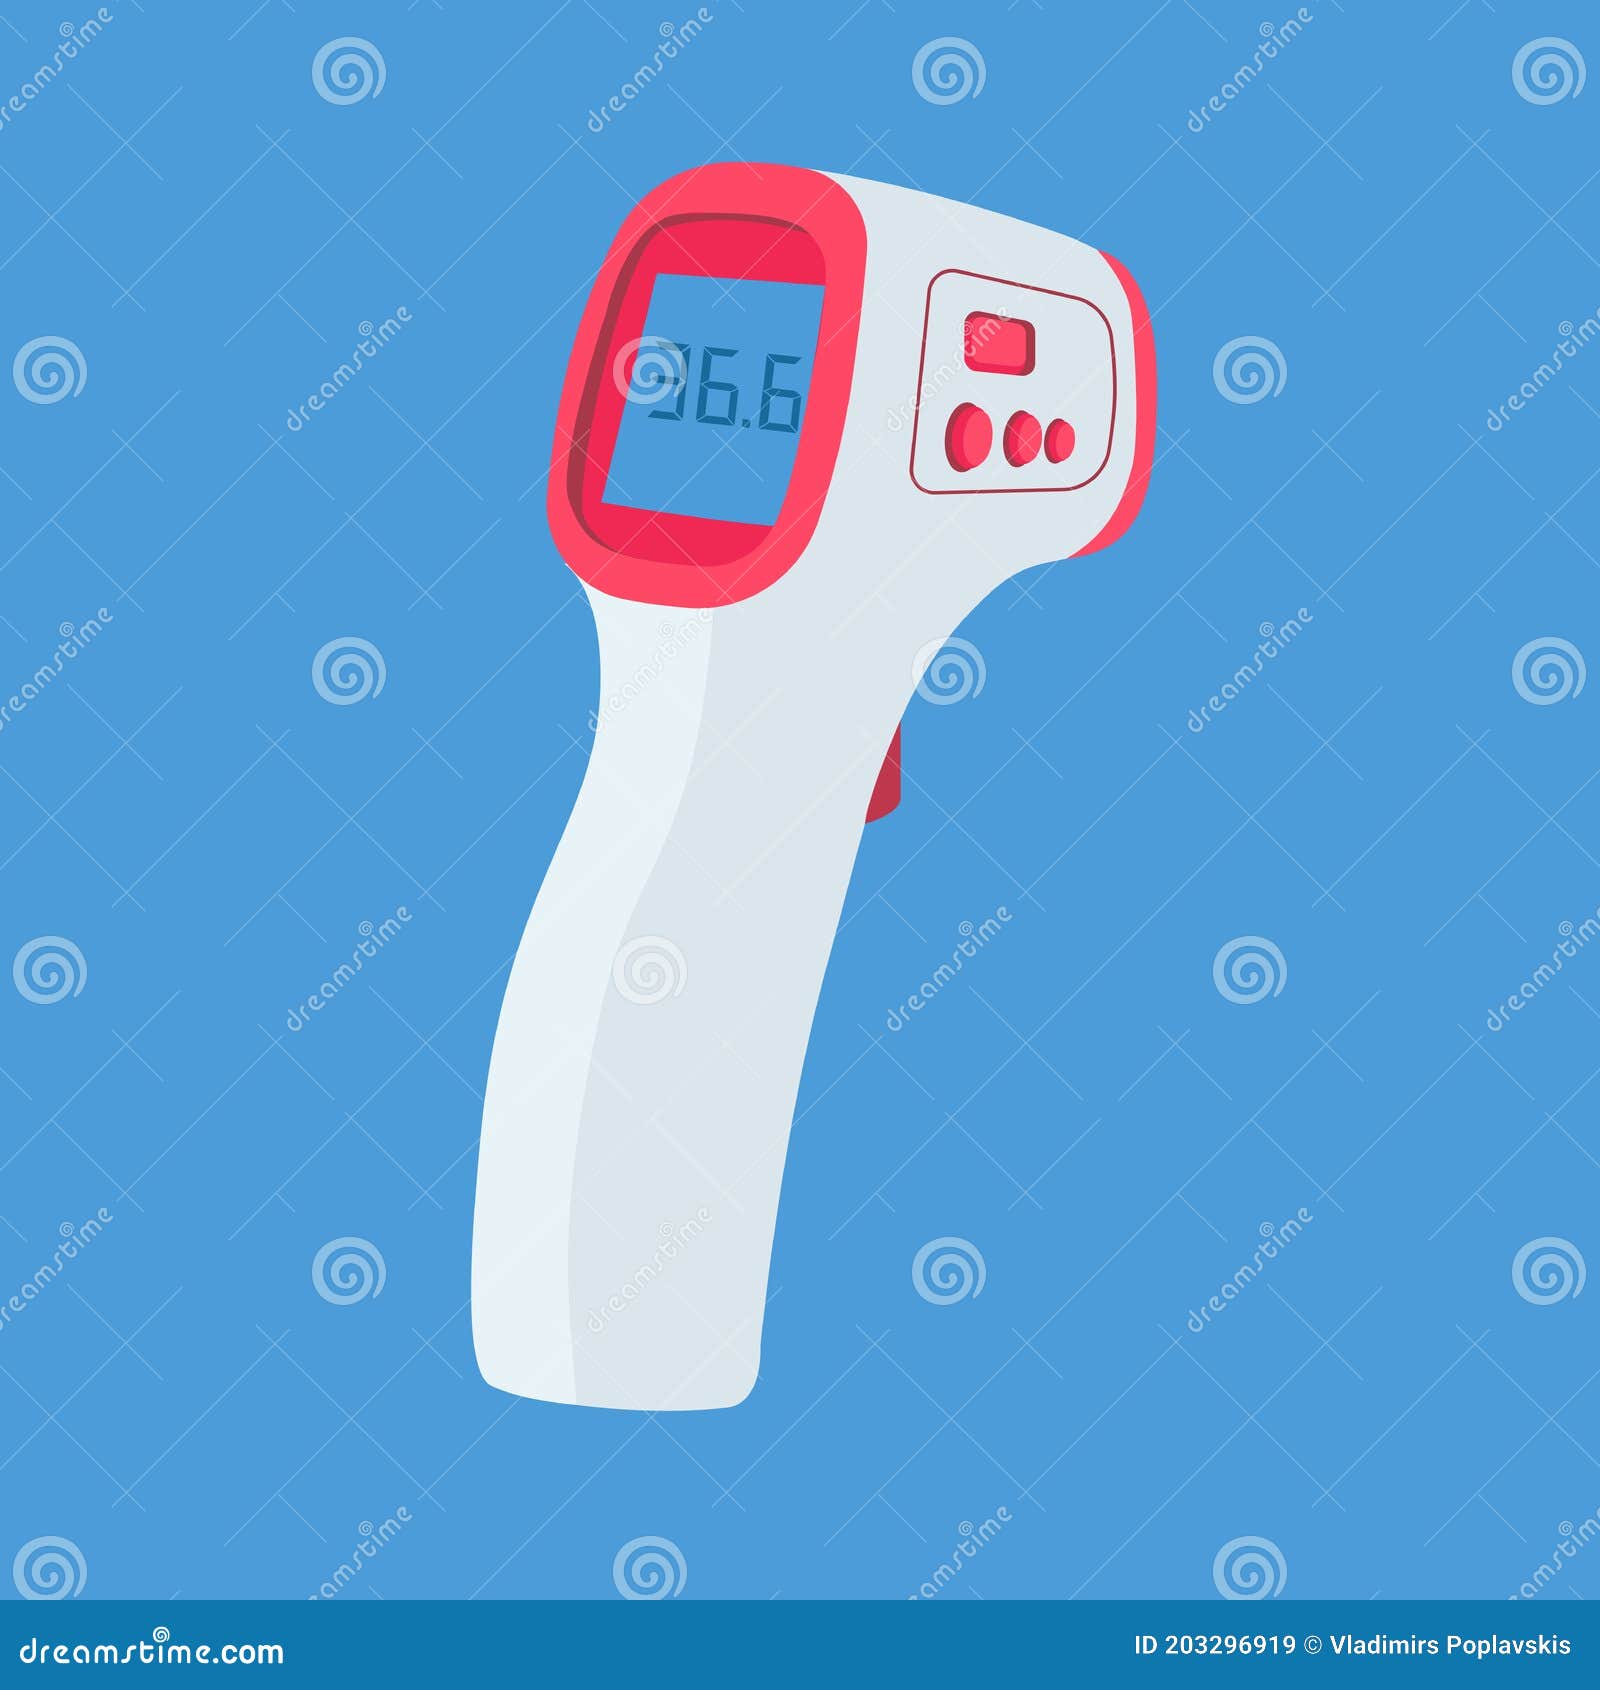 https://thumbs.dreamstime.com/z/illustration-medical-mobile-non-contact-thermometer-showing-basic-units-human-temperature-blue-background-clip-art-203296919.jpg